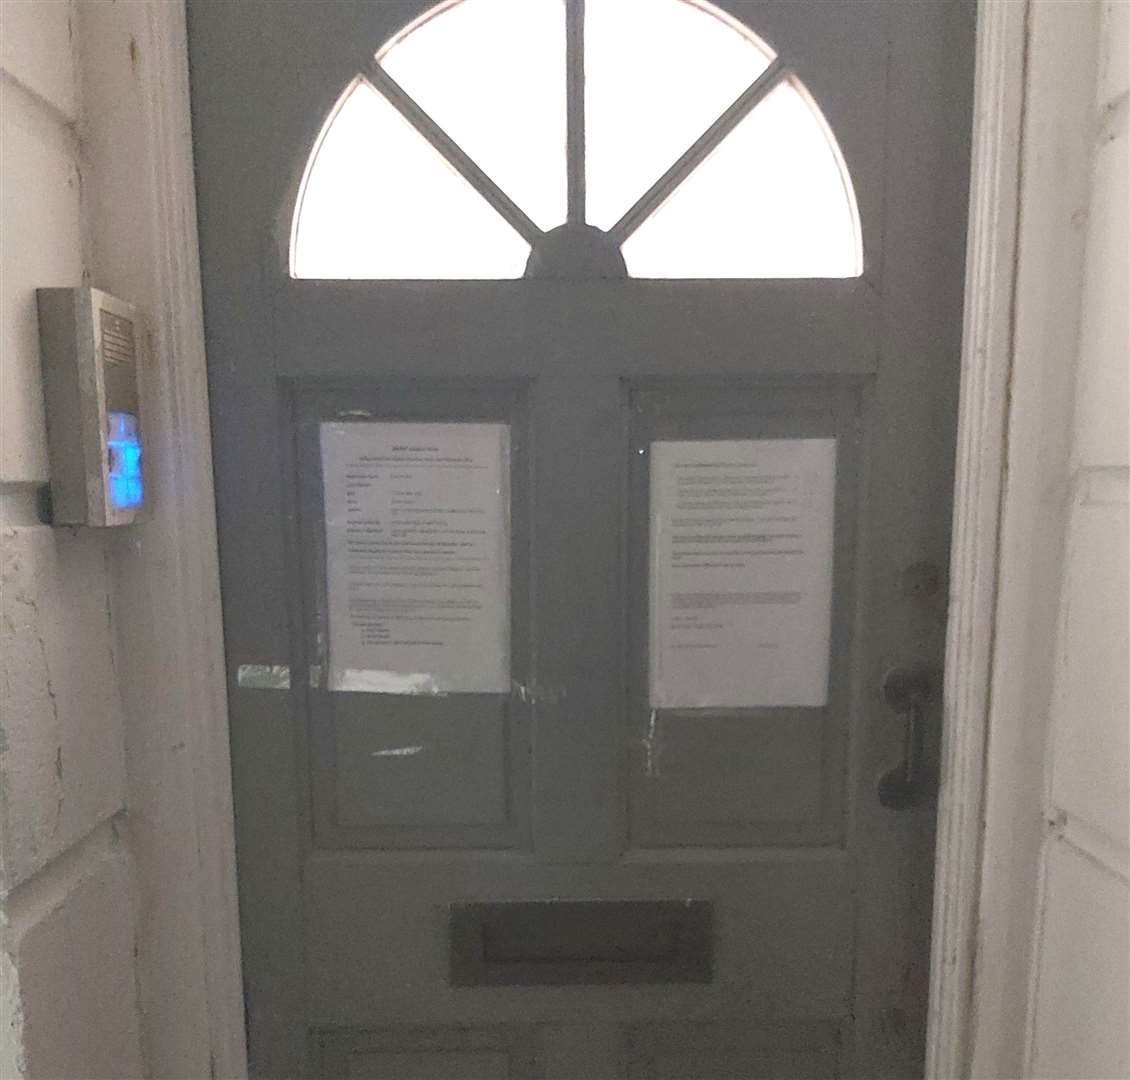 A closure order has been made for the flat in Holmesdale Terrace. Picture: Kent Police